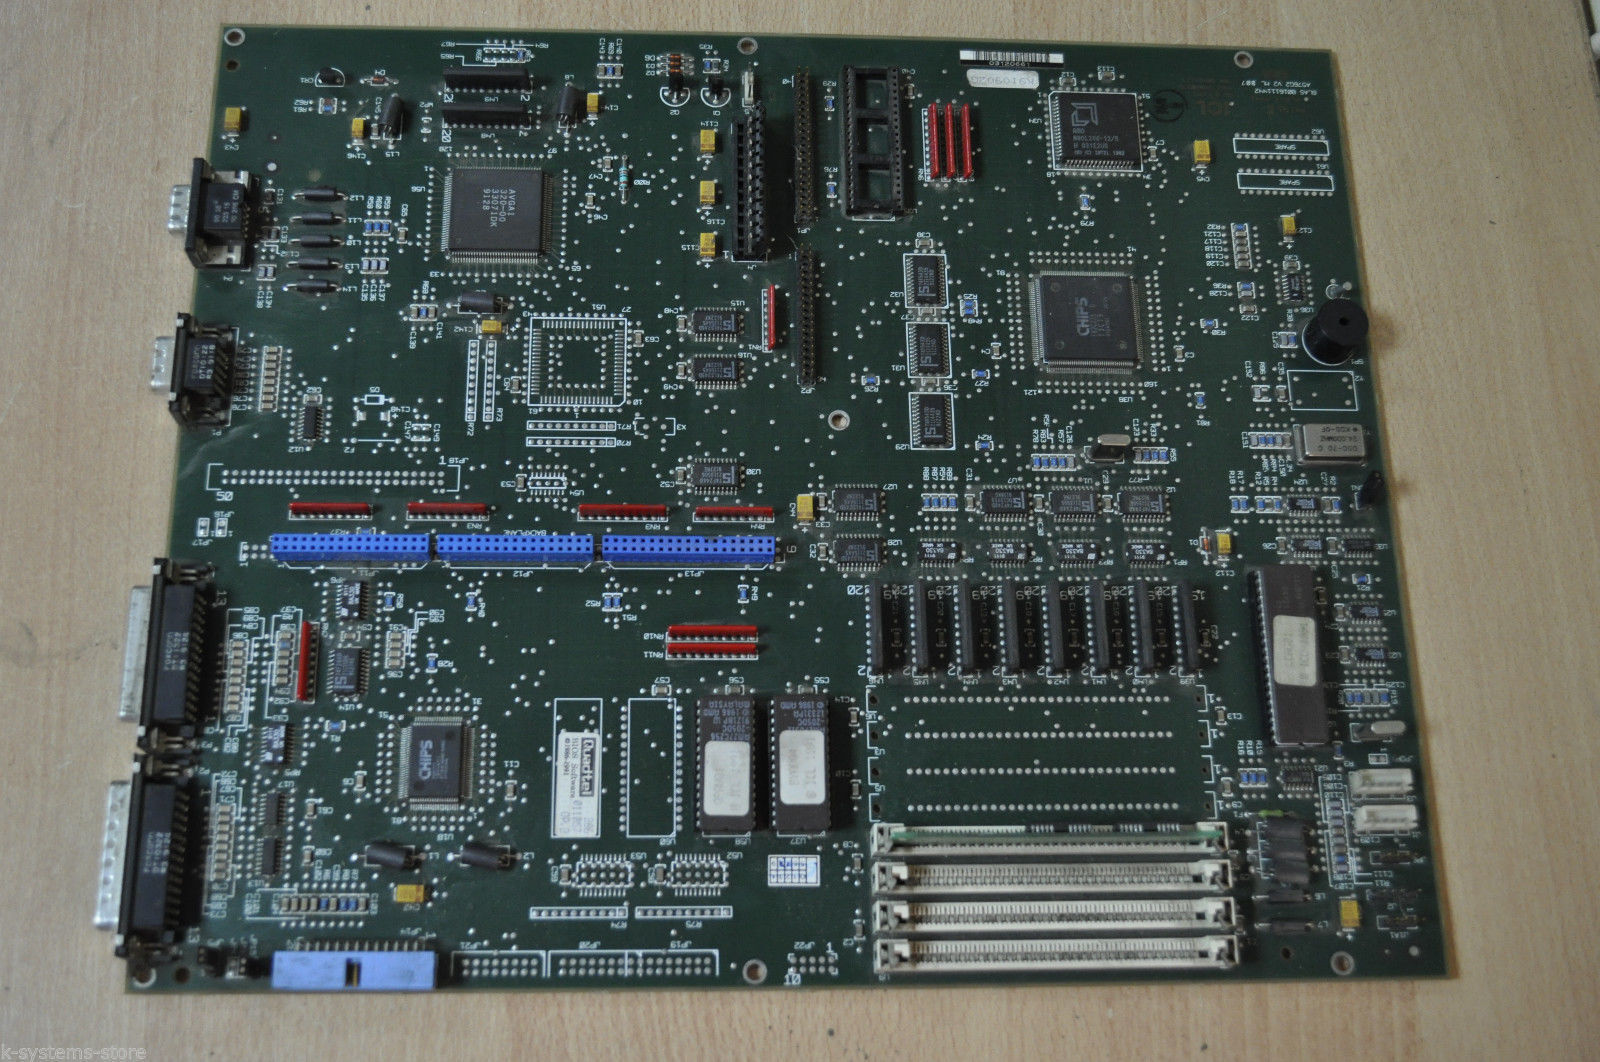 ICL ASSY 88830576, PBN 80161114, 286 MOTHERBOARD 1991 year + AMD N80L286-12/S 